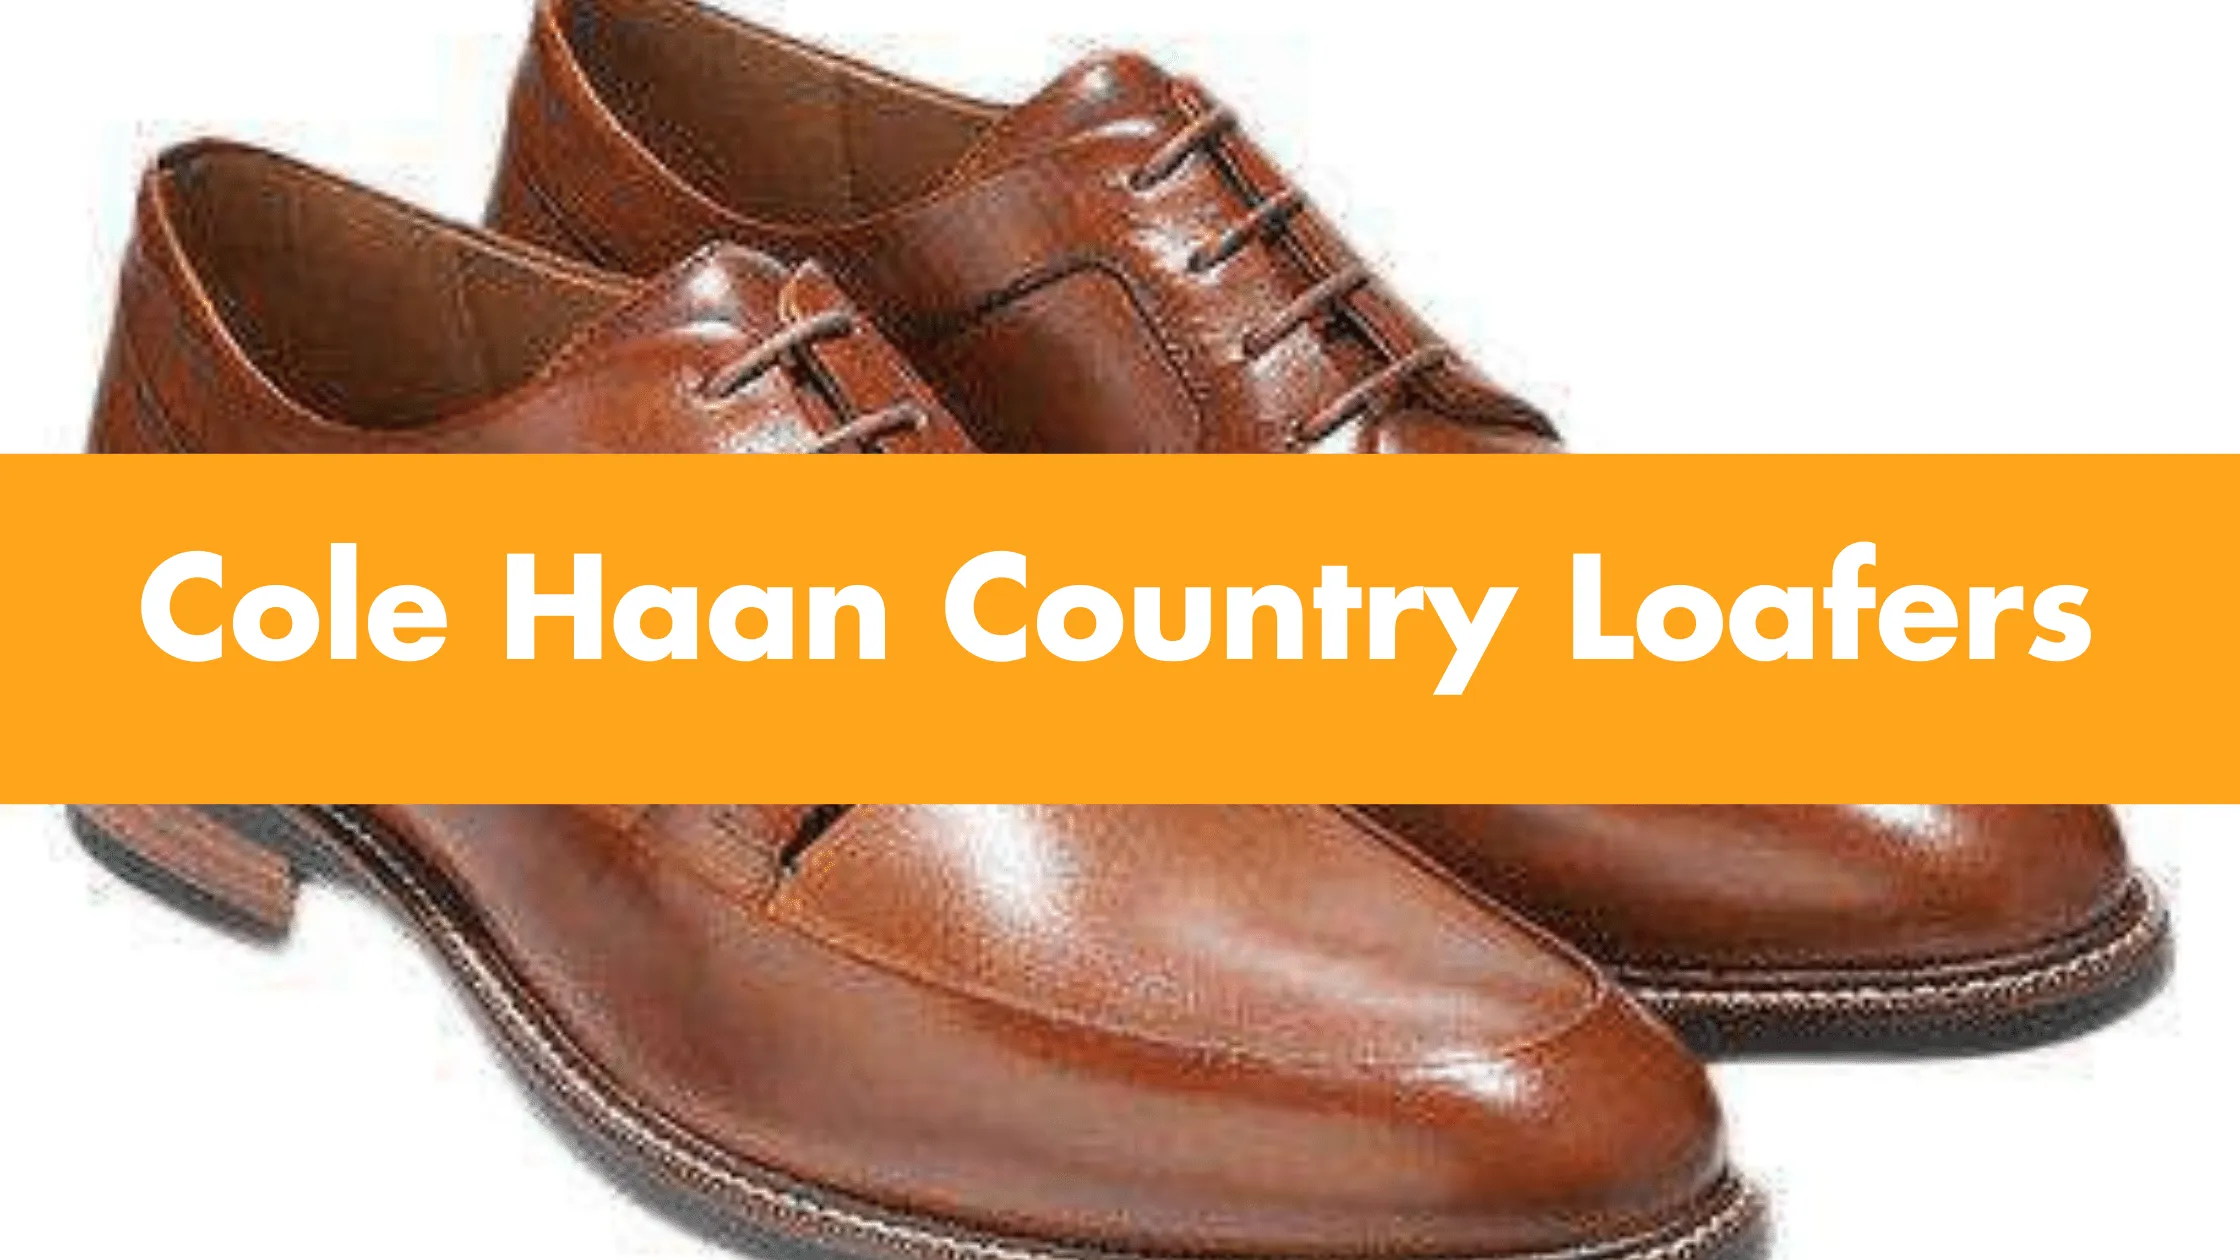 Cole Haan Country Loafers